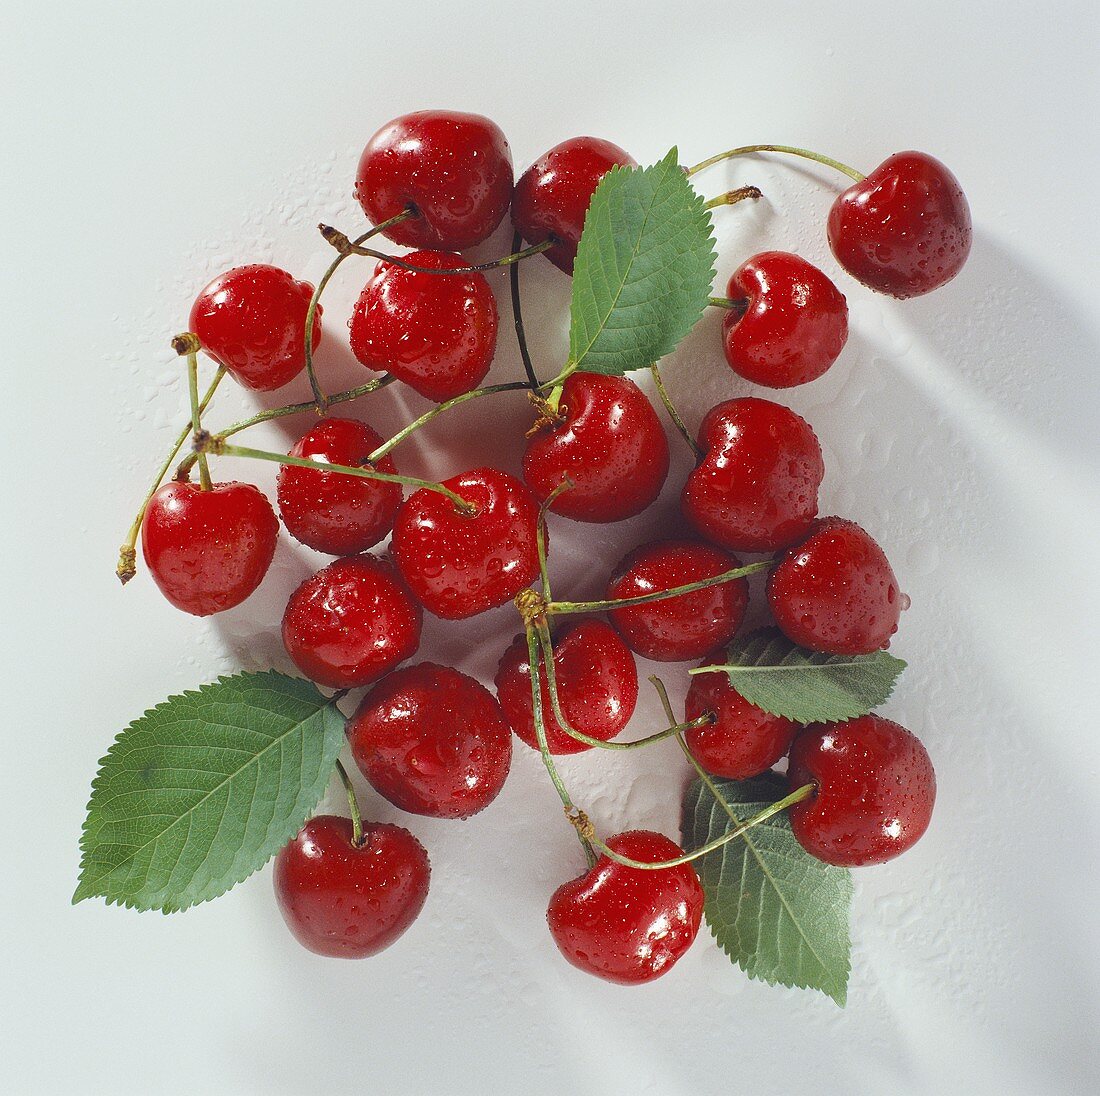 Several Washed Cherries